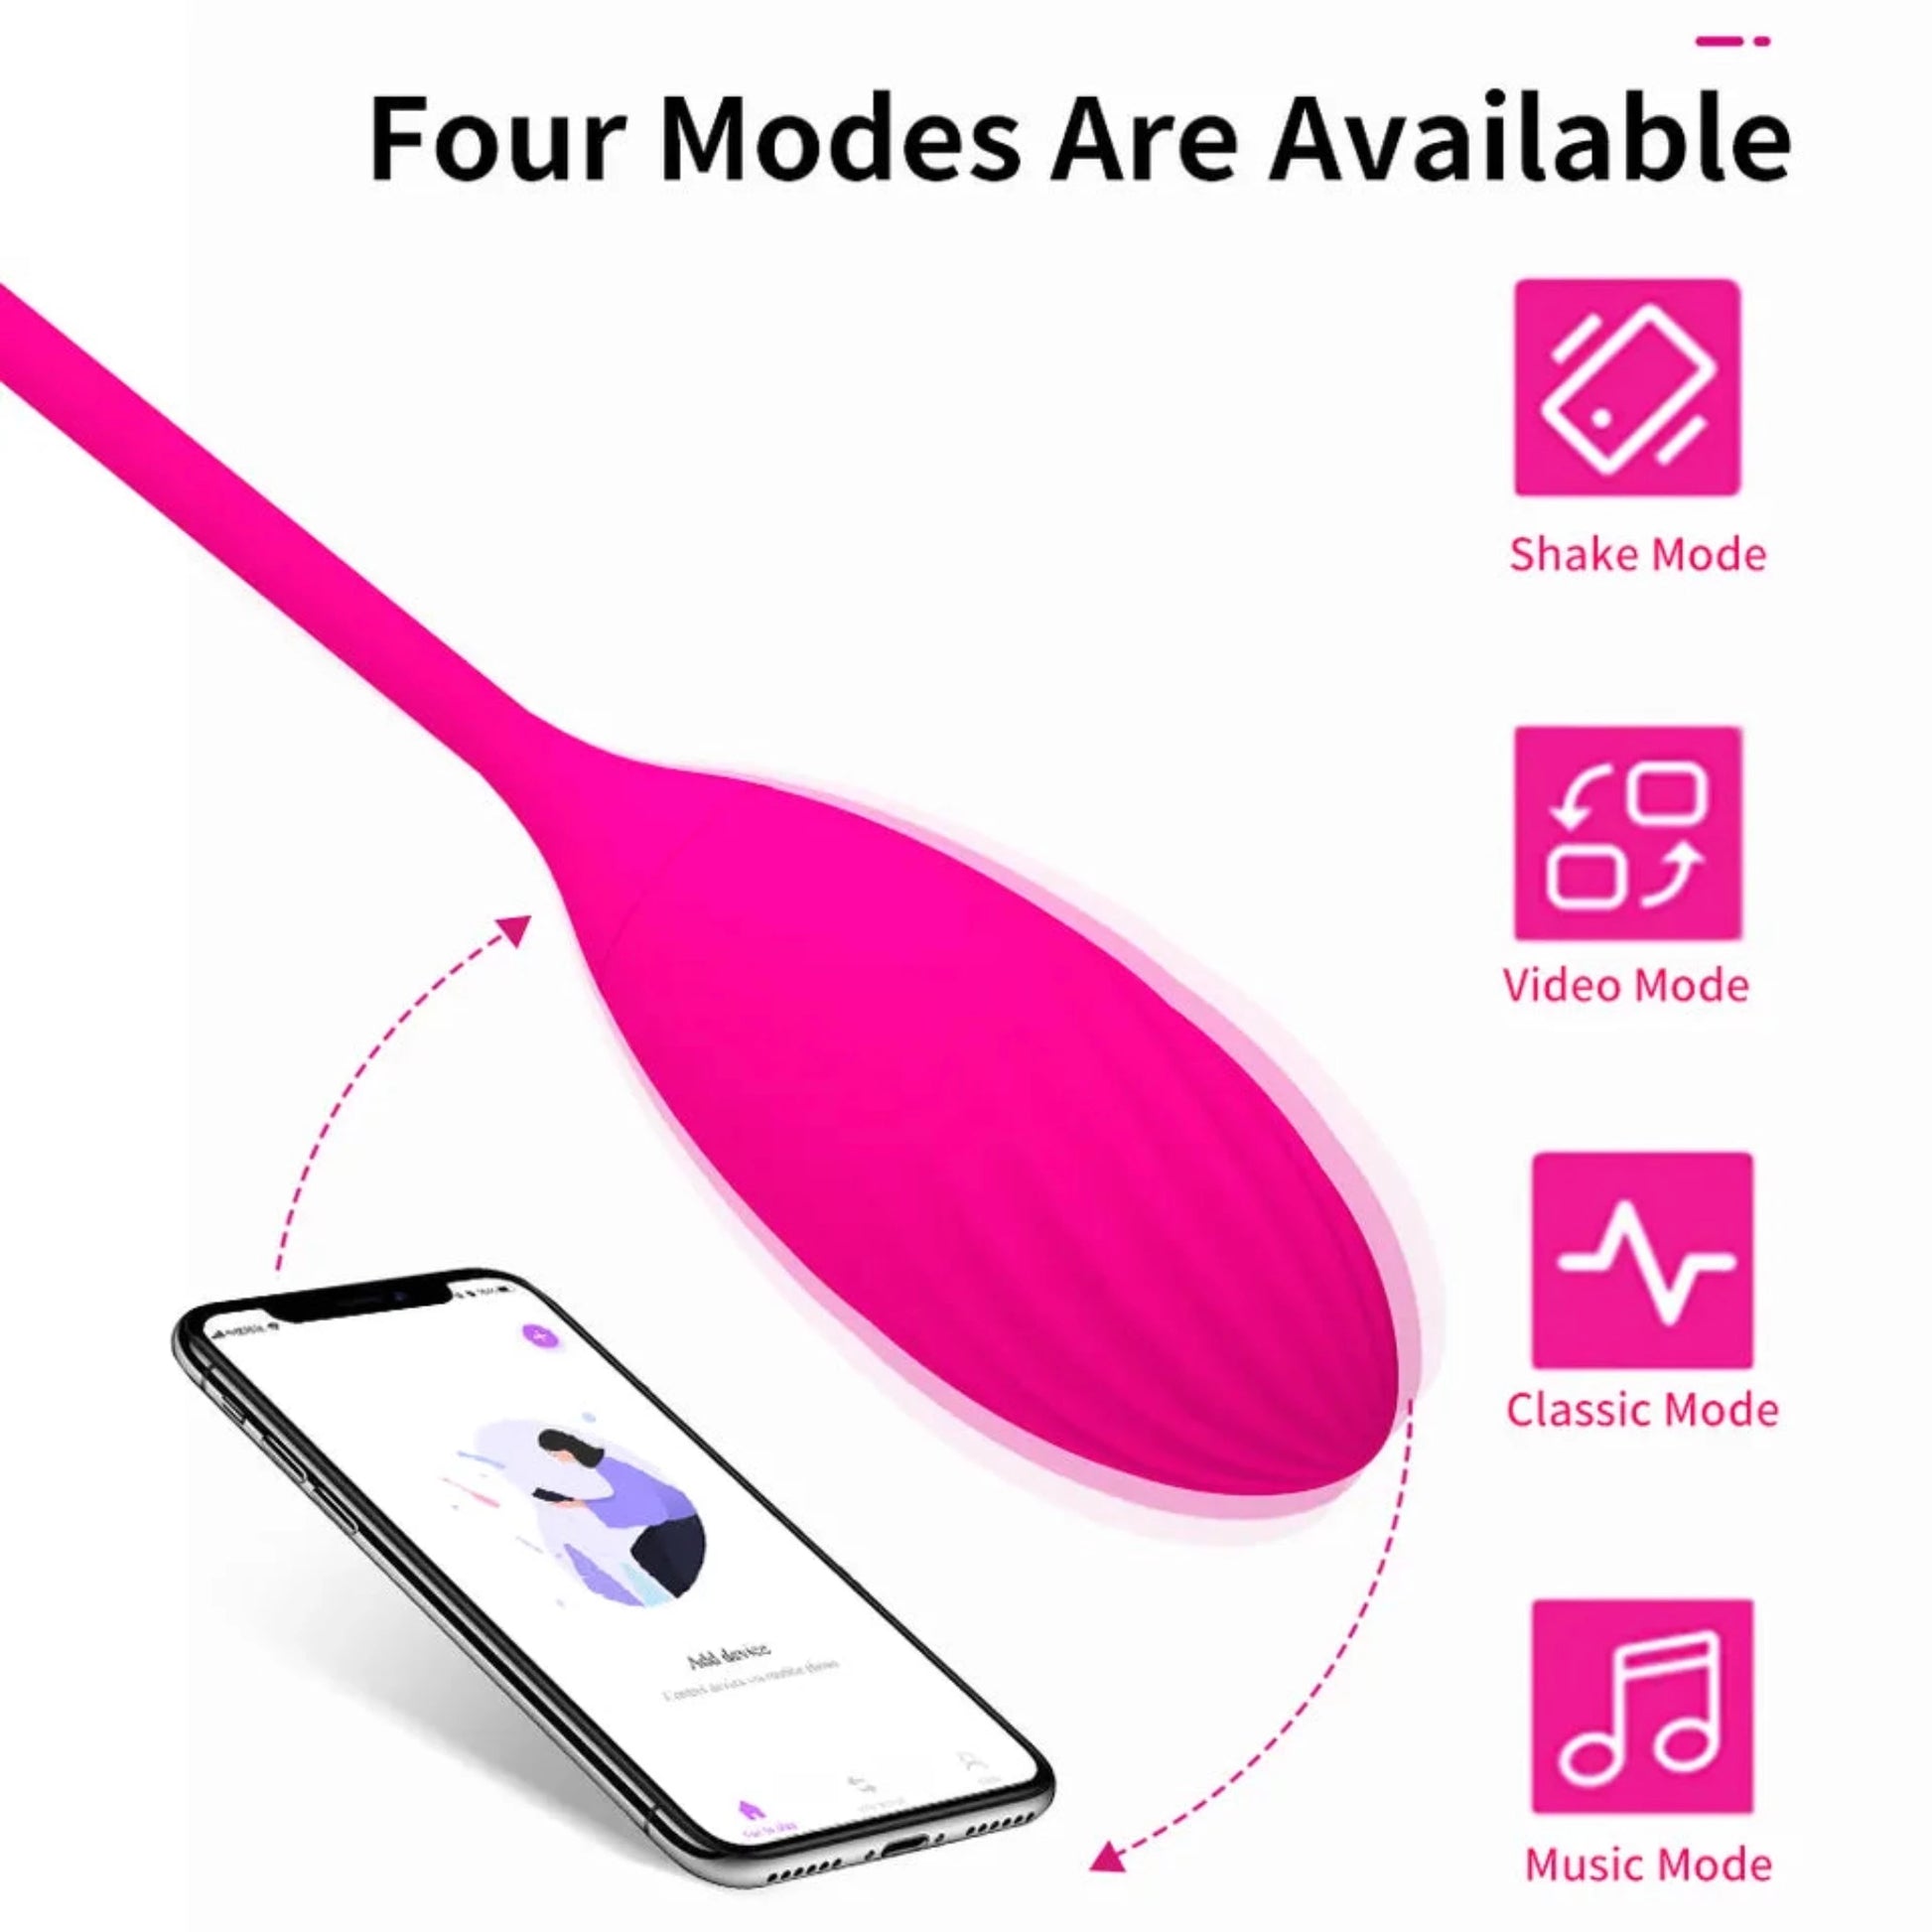 Youngwill APP Remote Love Egg Vibrator